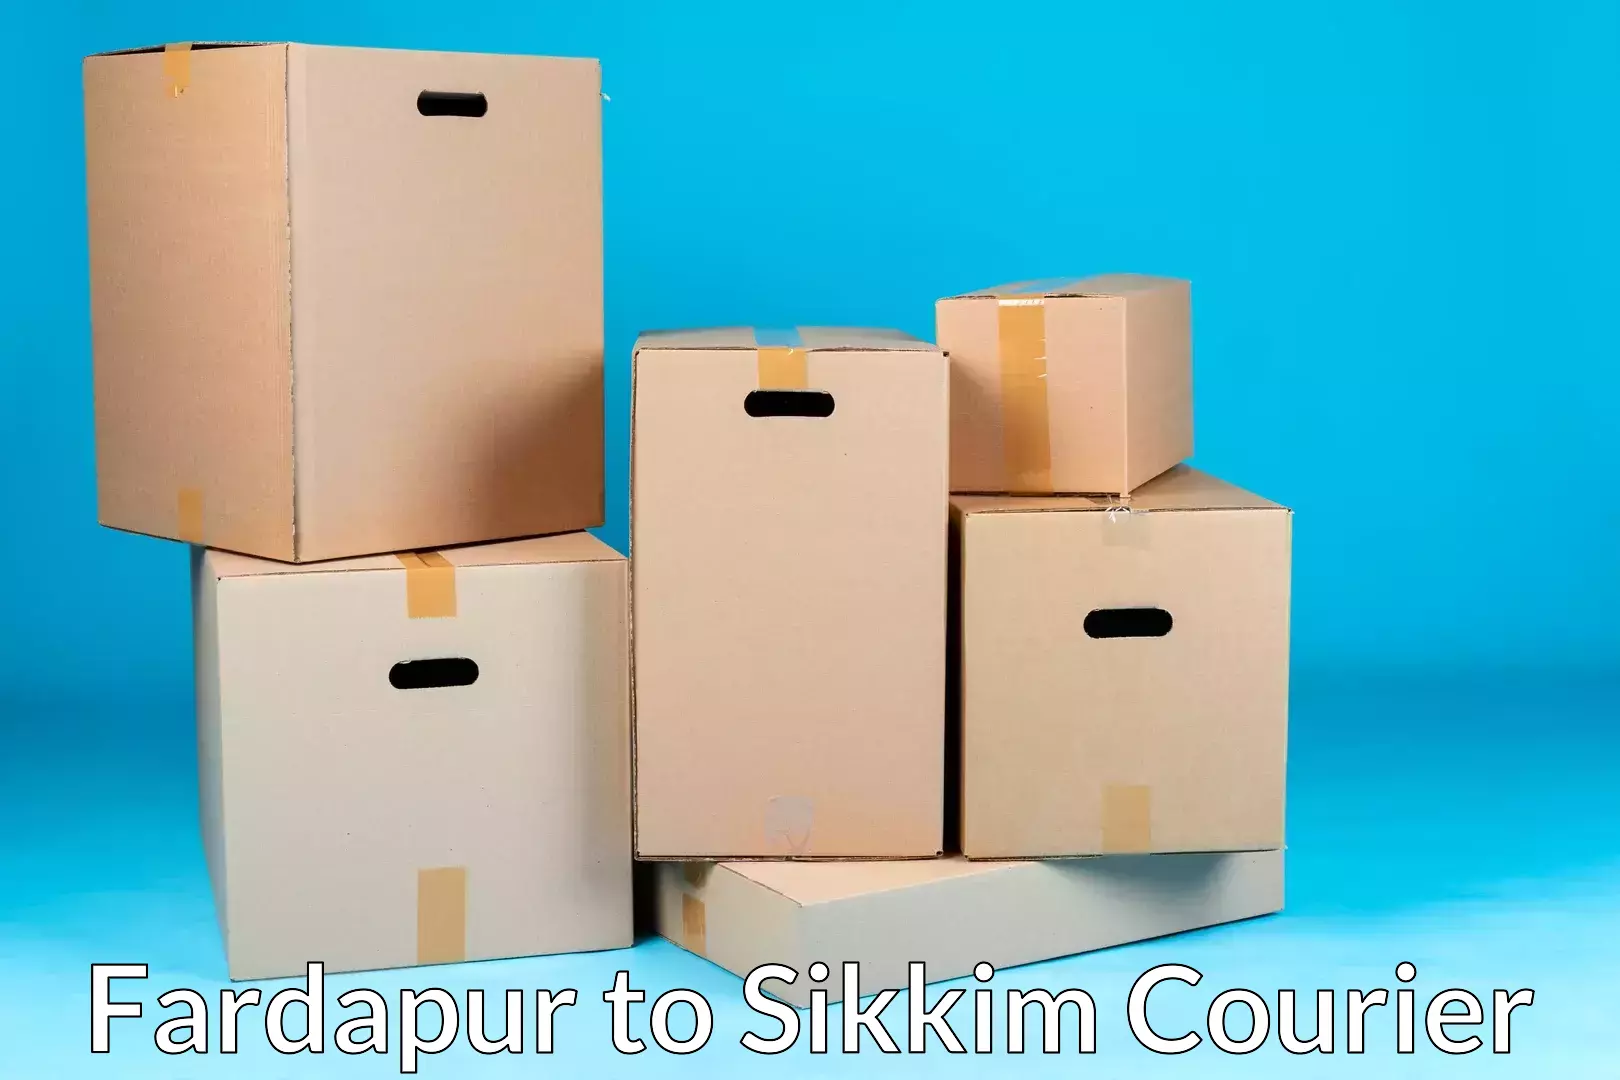 Home shifting experts Fardapur to Sikkim